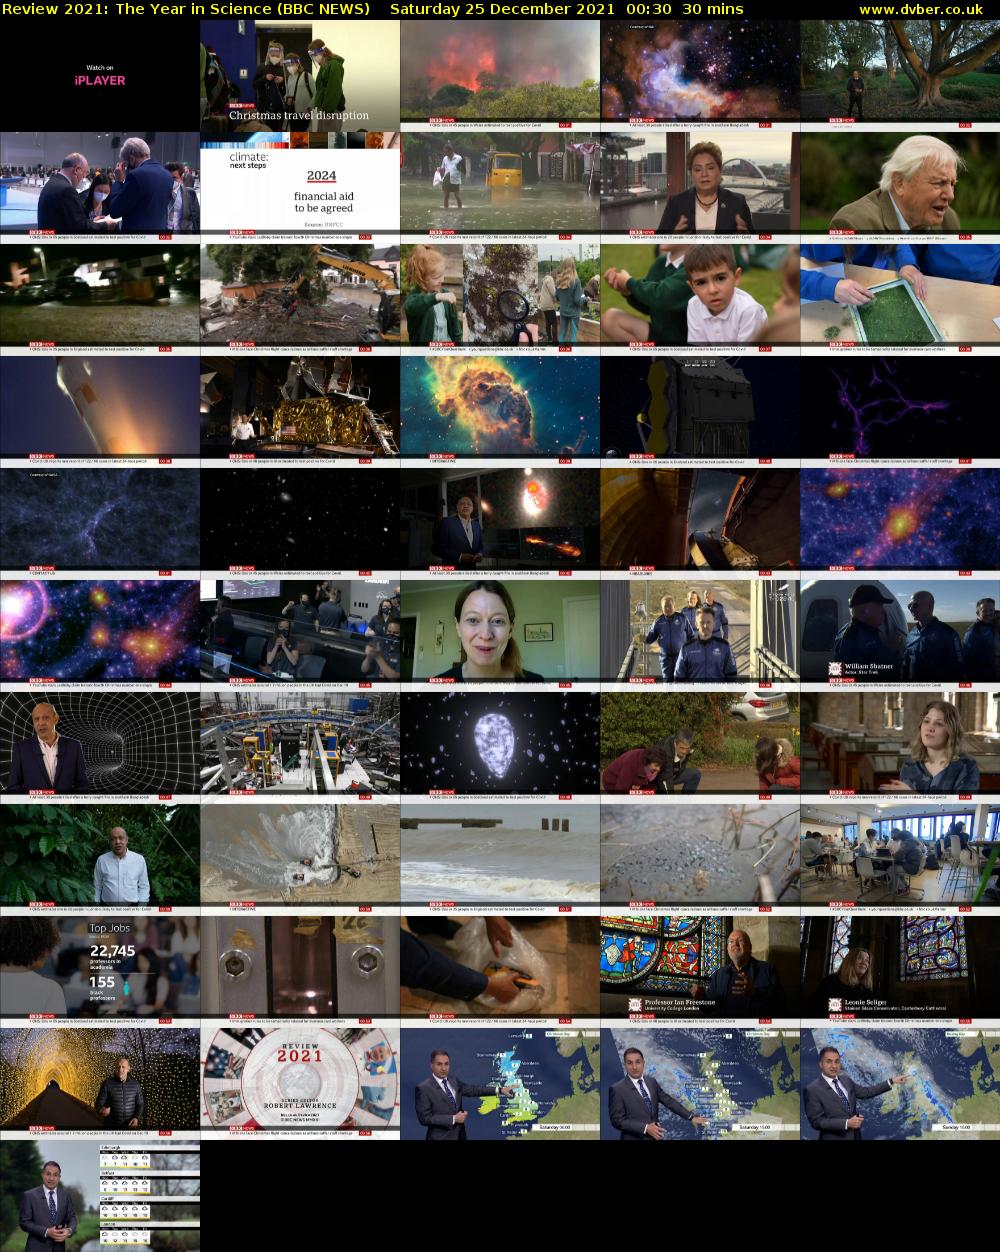 Review 2021: The Year in Science (BBC NEWS) Saturday 25 December 2021 00:30 - 01:00